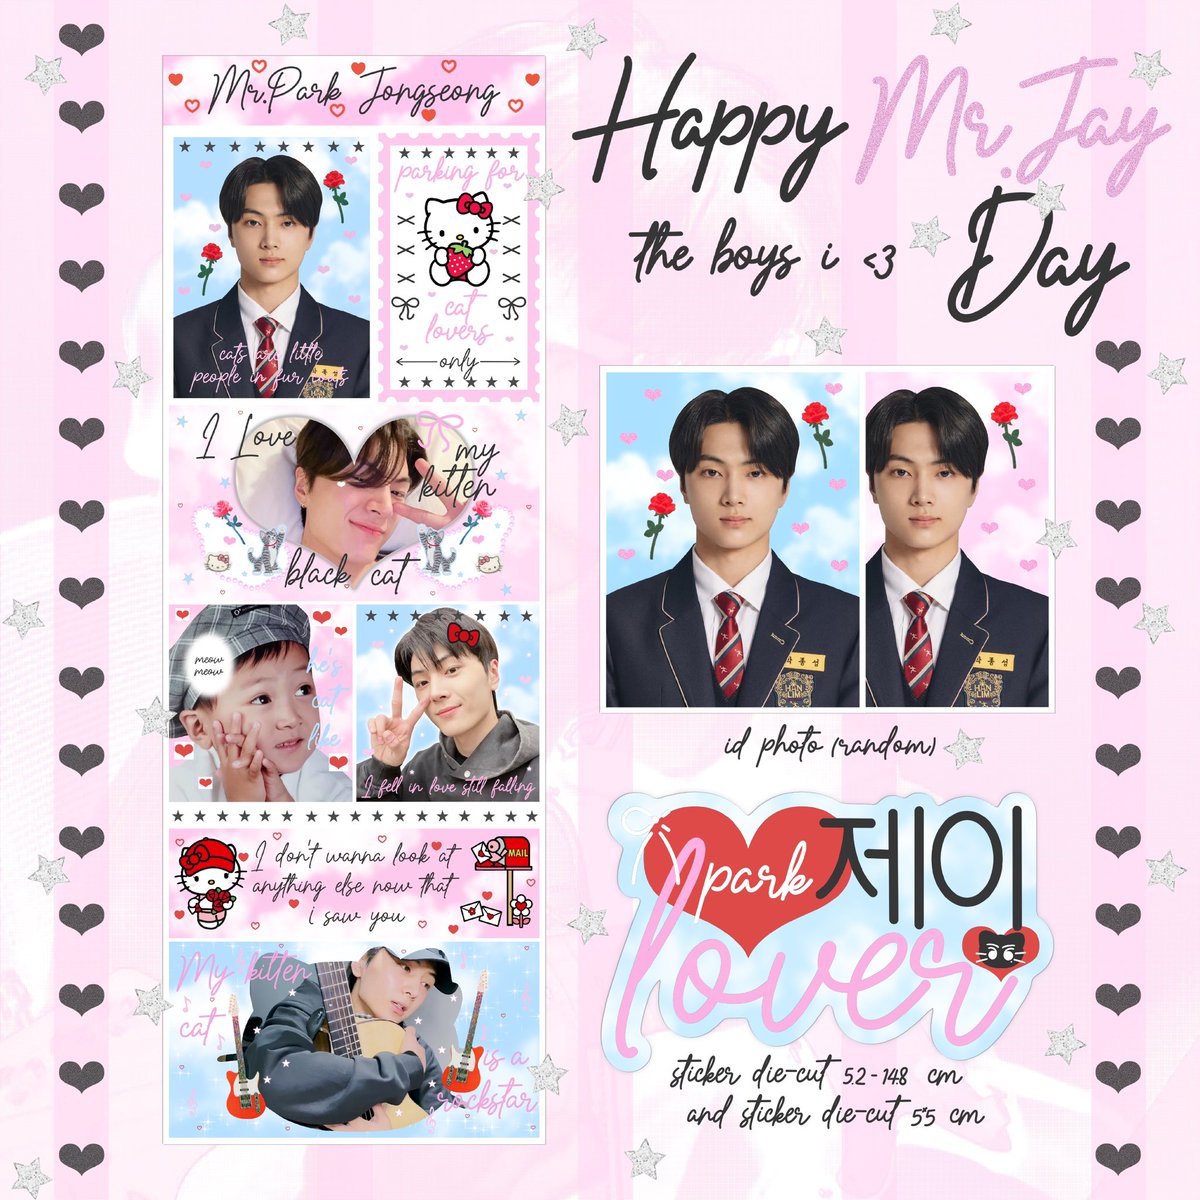 kindly retweet 👩🏻‍❤️‍💋‍👩🏻 ♥︎𓈒 giveaway for #happyjayday ☁️𓈒 only 4 sets for jay lover gg form : 21 april ( 20:04 ) ♥︎ sticker die-cut 50% 1ea ♡ sticker die-cut 100% 1ea ♥︎ id photo jay random 1ea tag & exchange form in mt #HAPPY_JAY_DAY ≽^•⩊•^≼